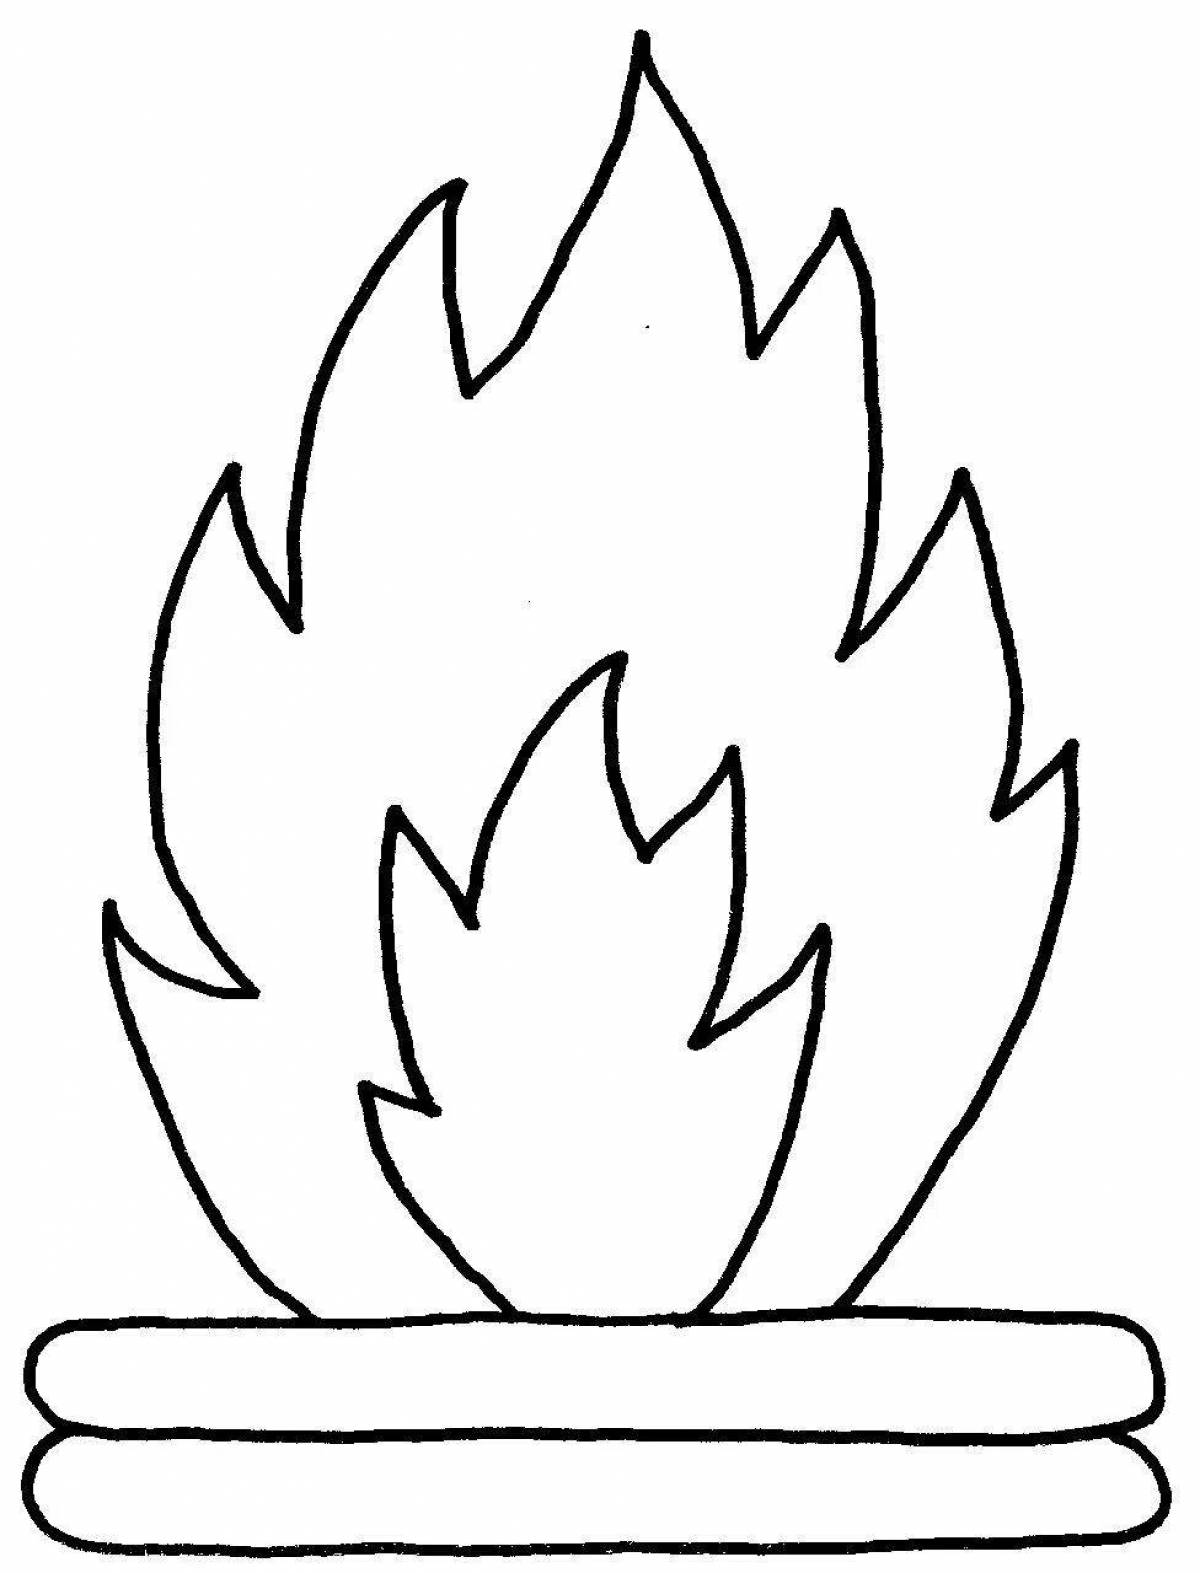 Coloring page stimulating fire for 3-4 year olds